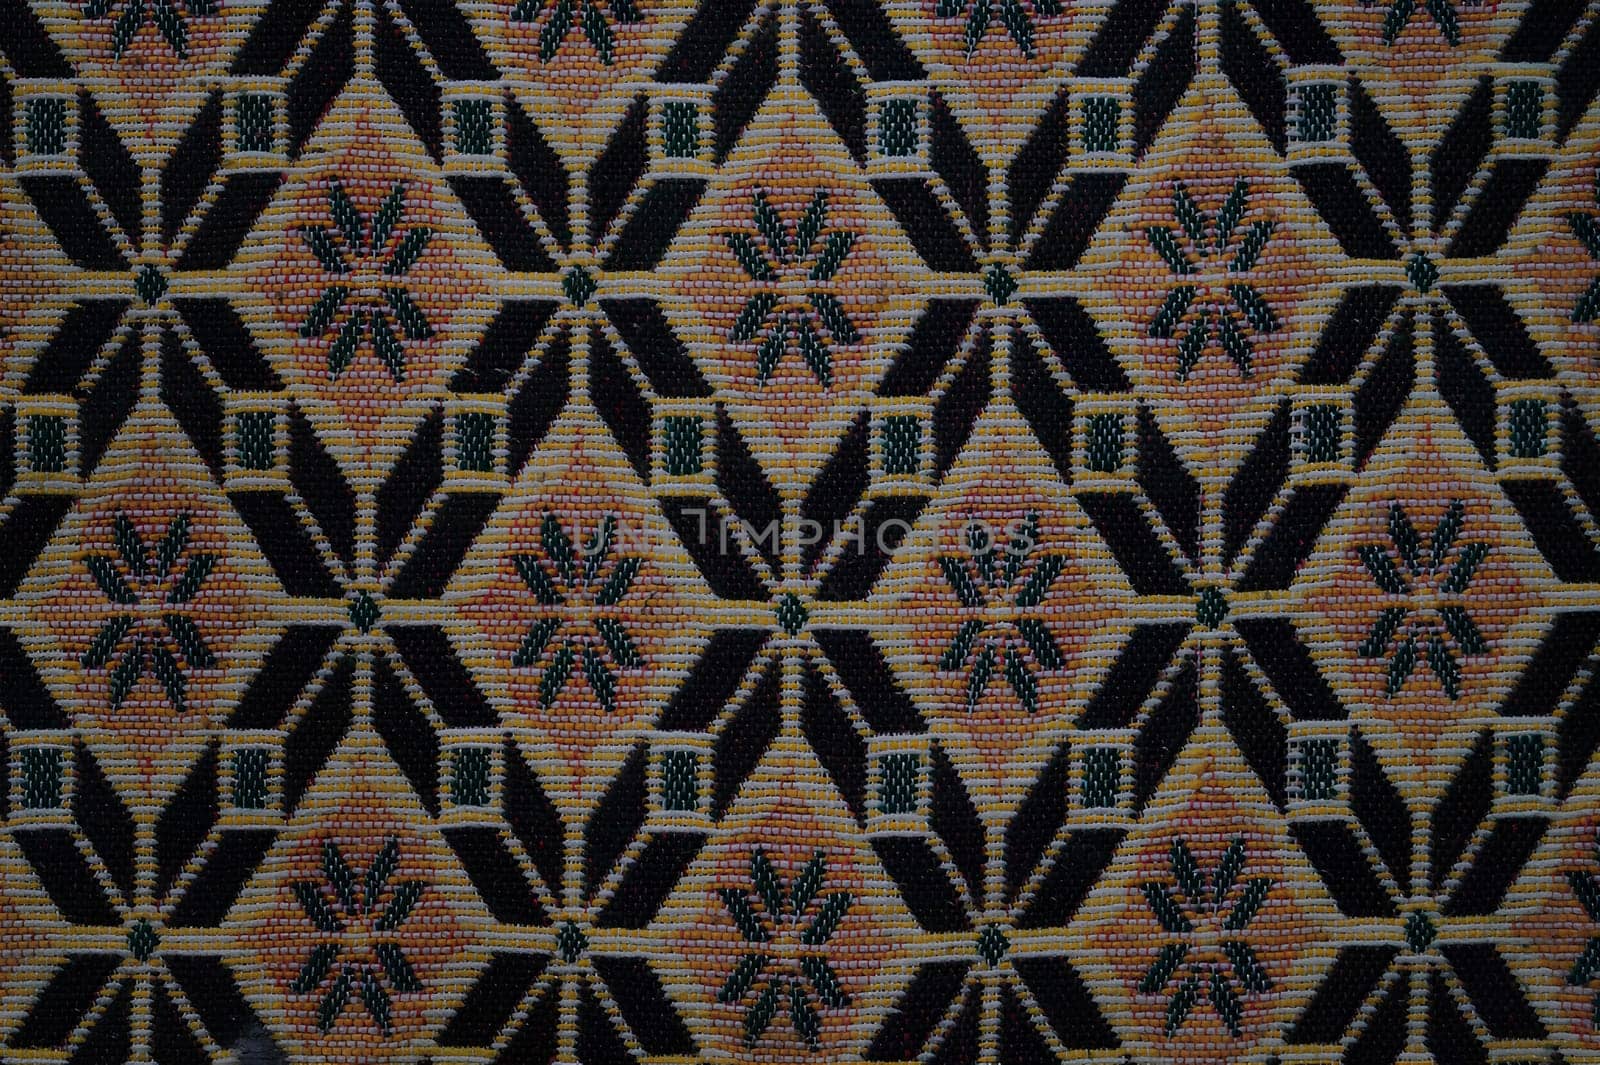 A patterned carpet with a black and brown color scheme by gadreel